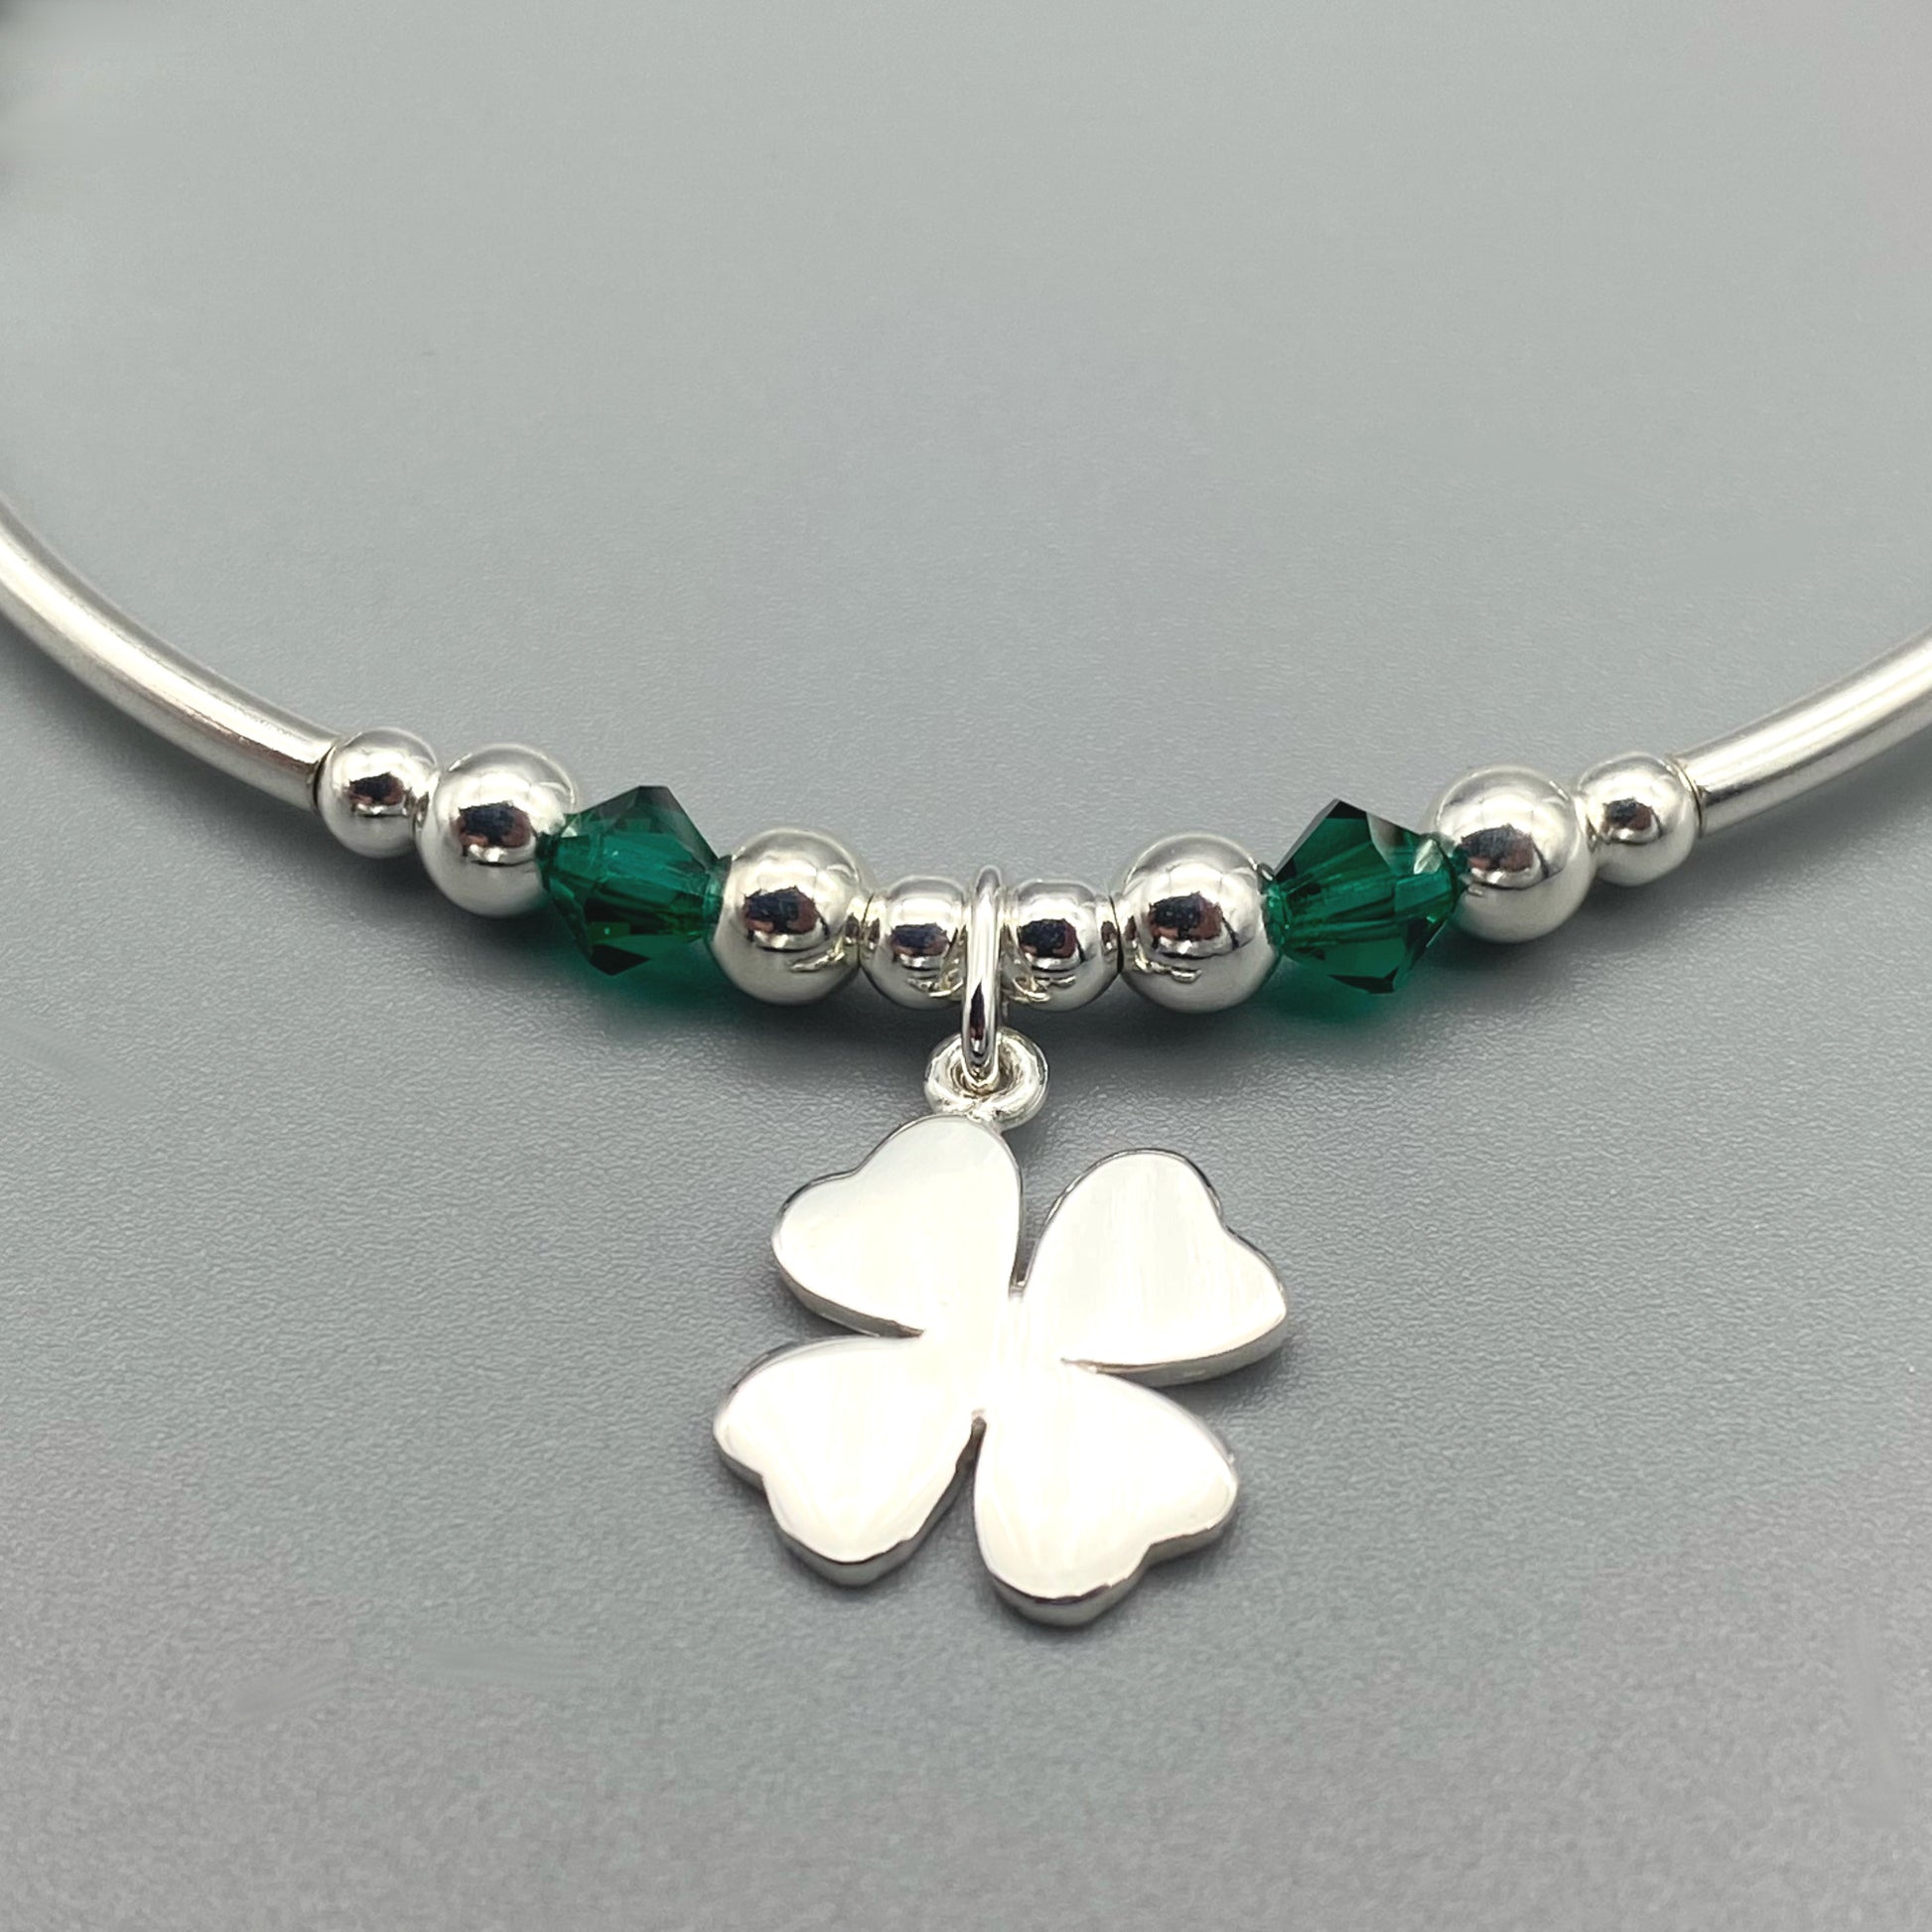 Closeup of "Good Luck" charm four leaf clover sterling silver hand-made stacking bracelet by My Silver Wish